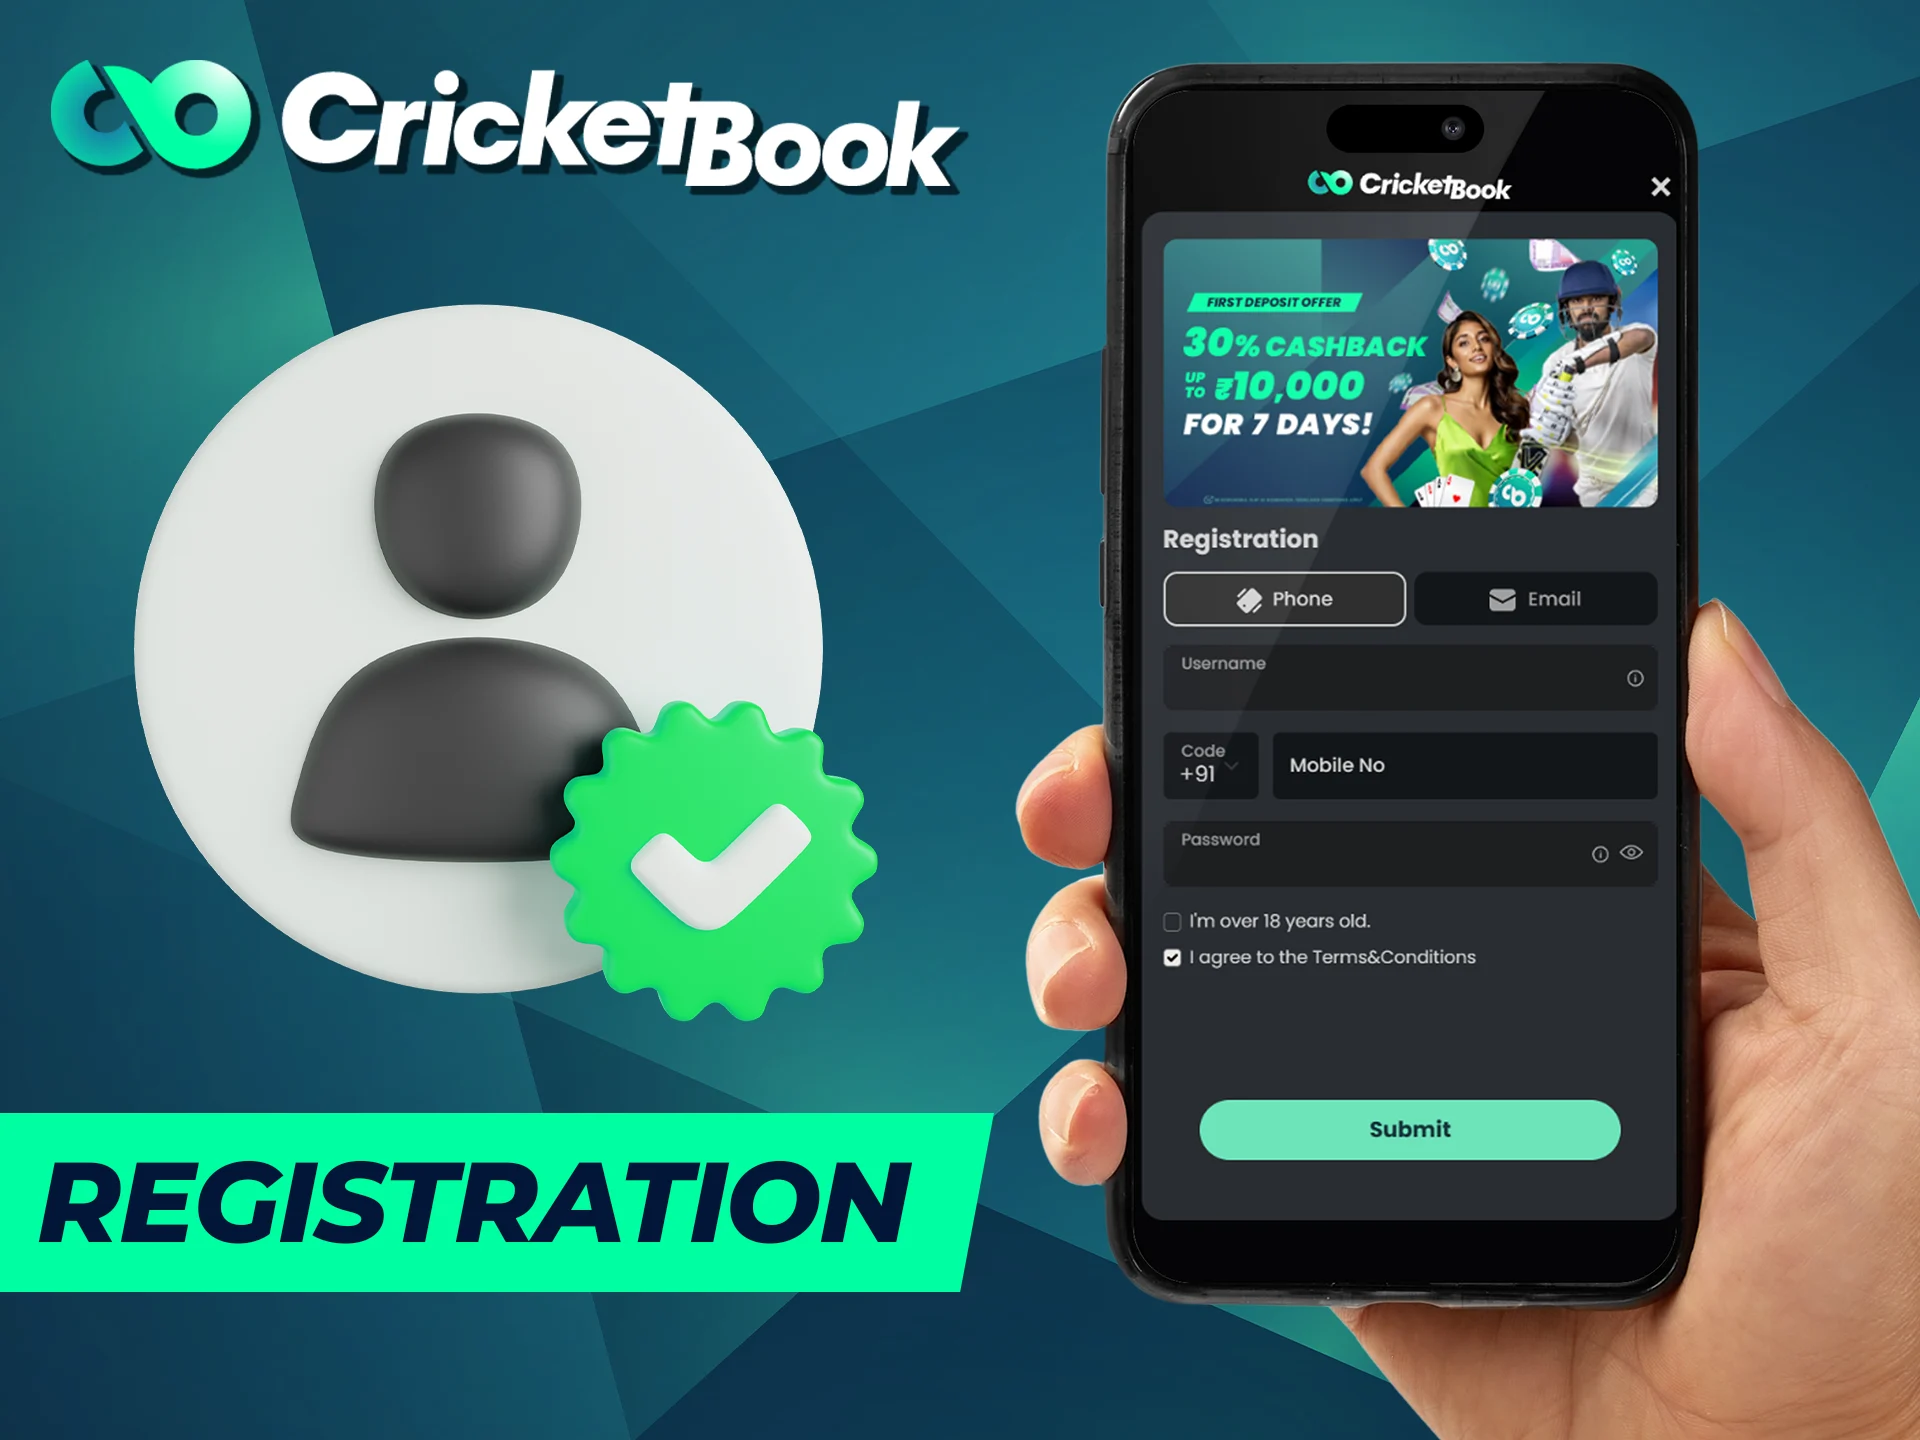 In the CricketBook app it is possible to register by phone or email.